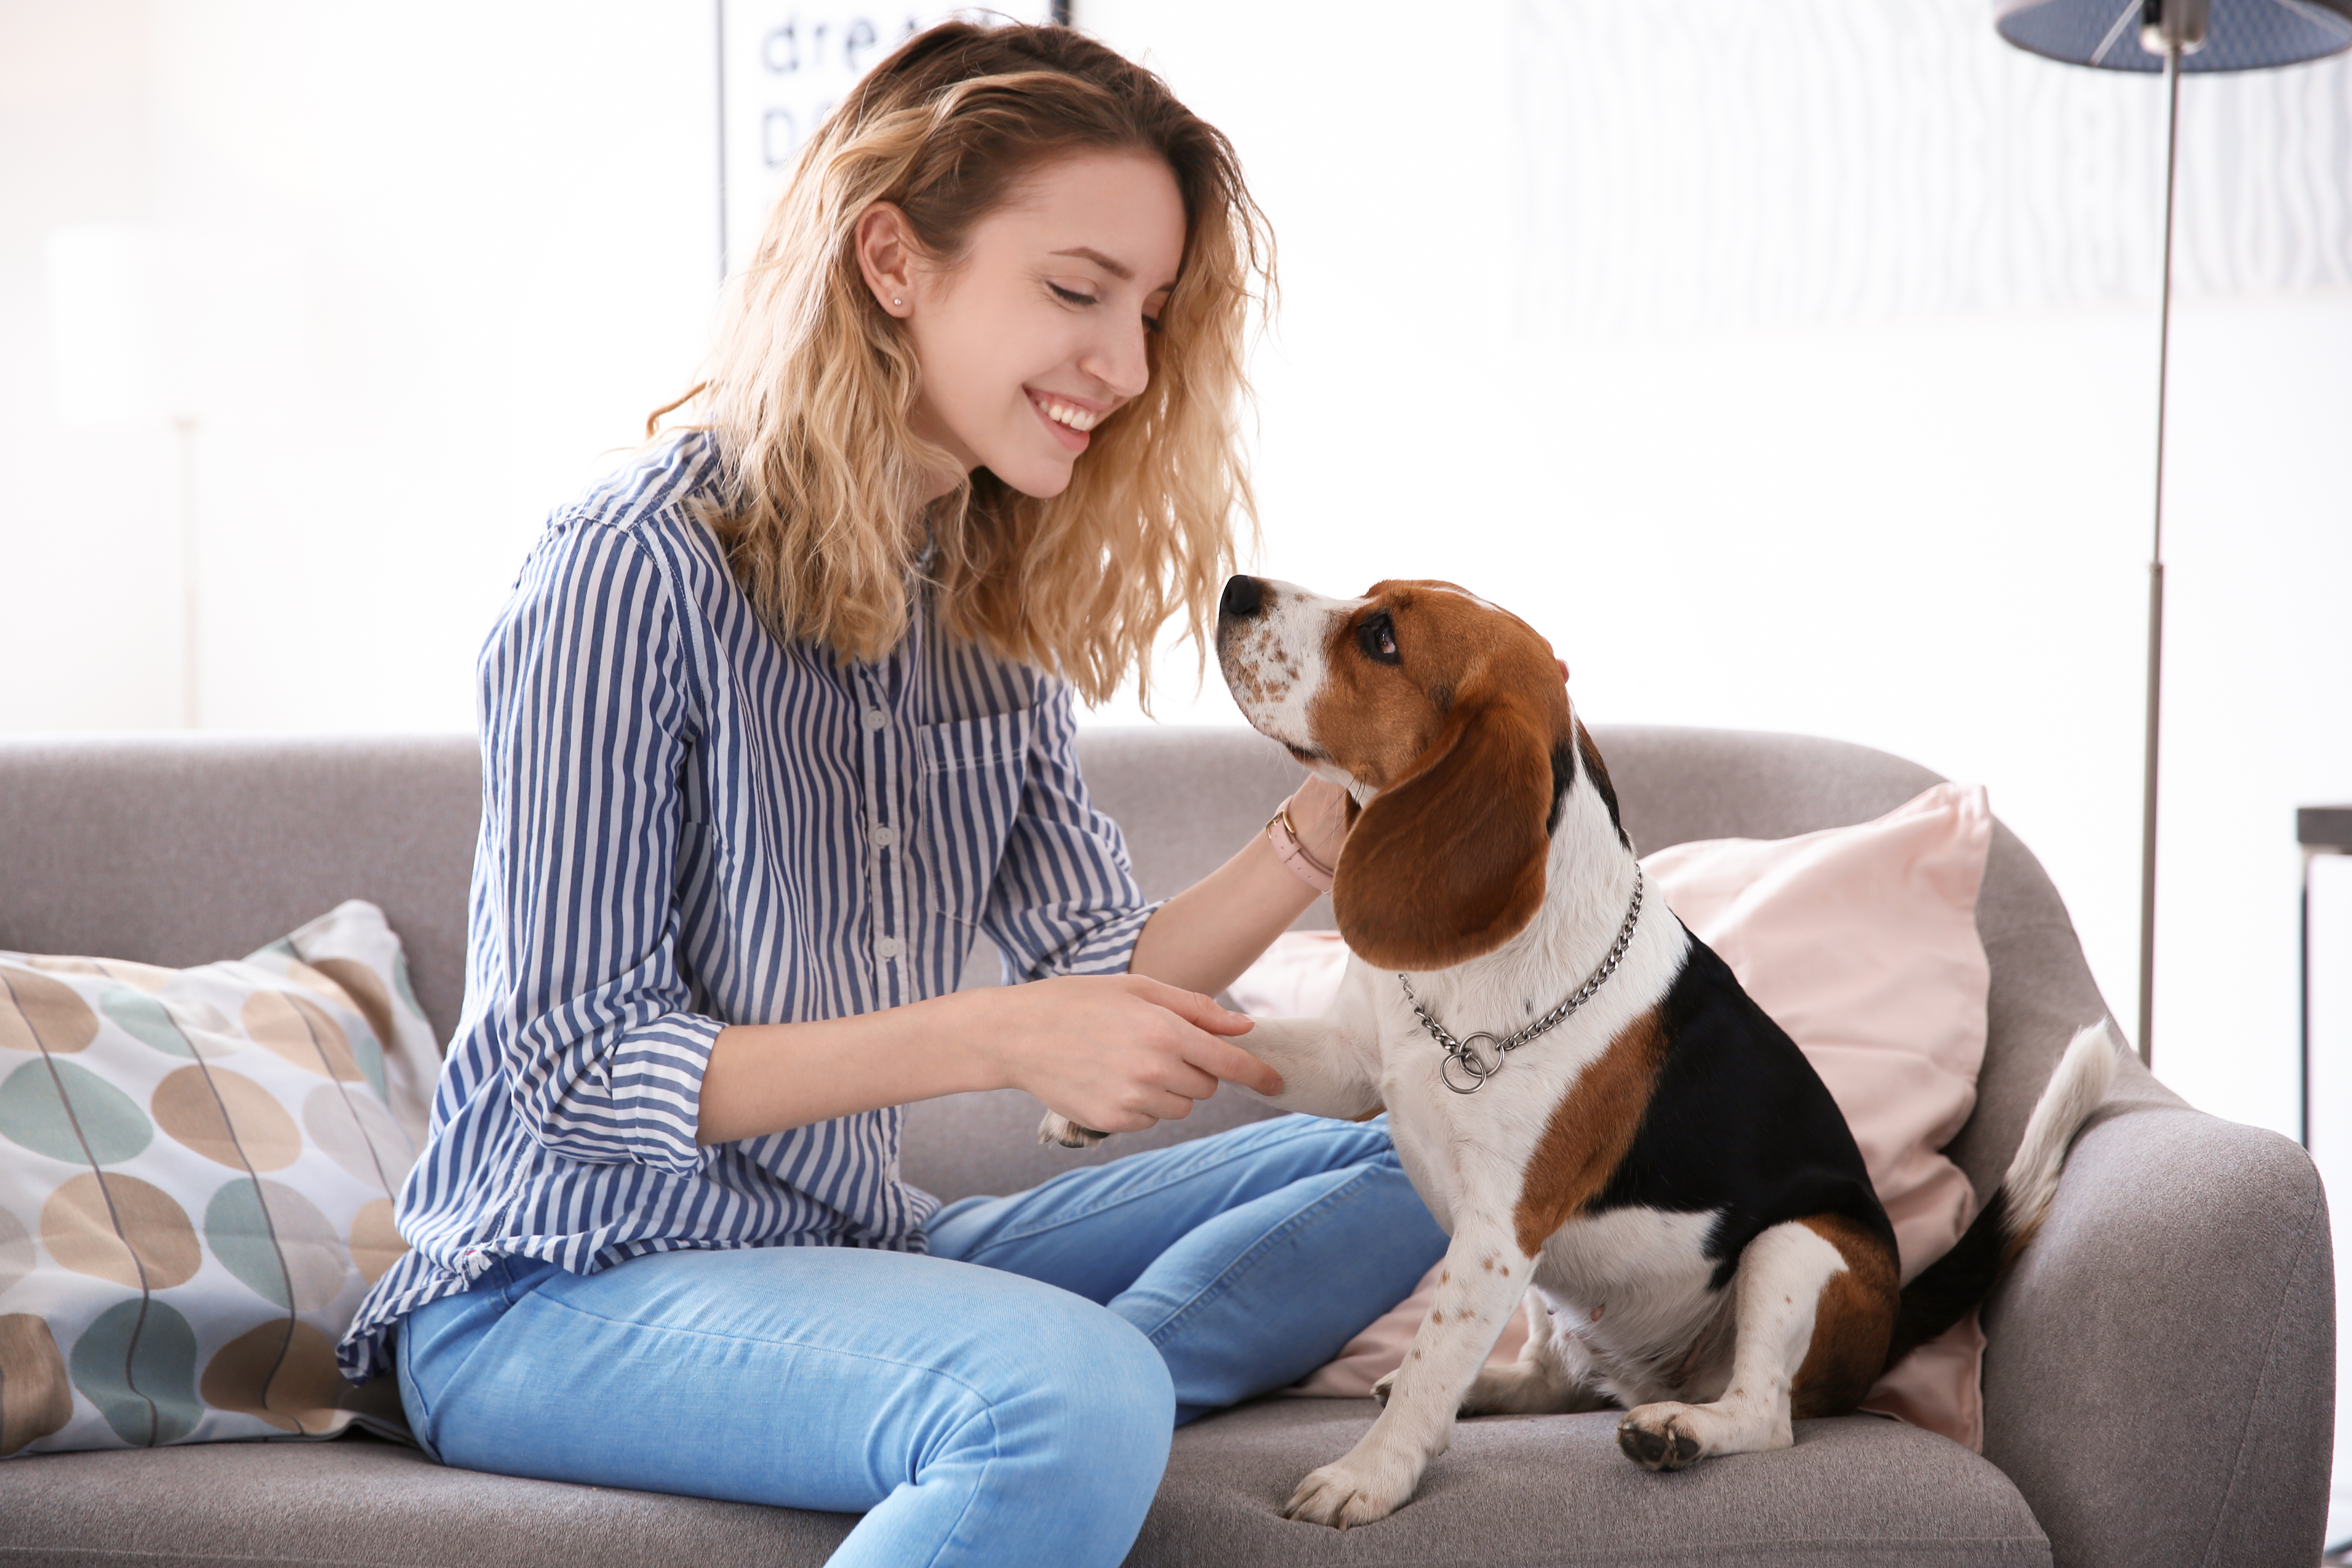 woman sitting on couch with dog